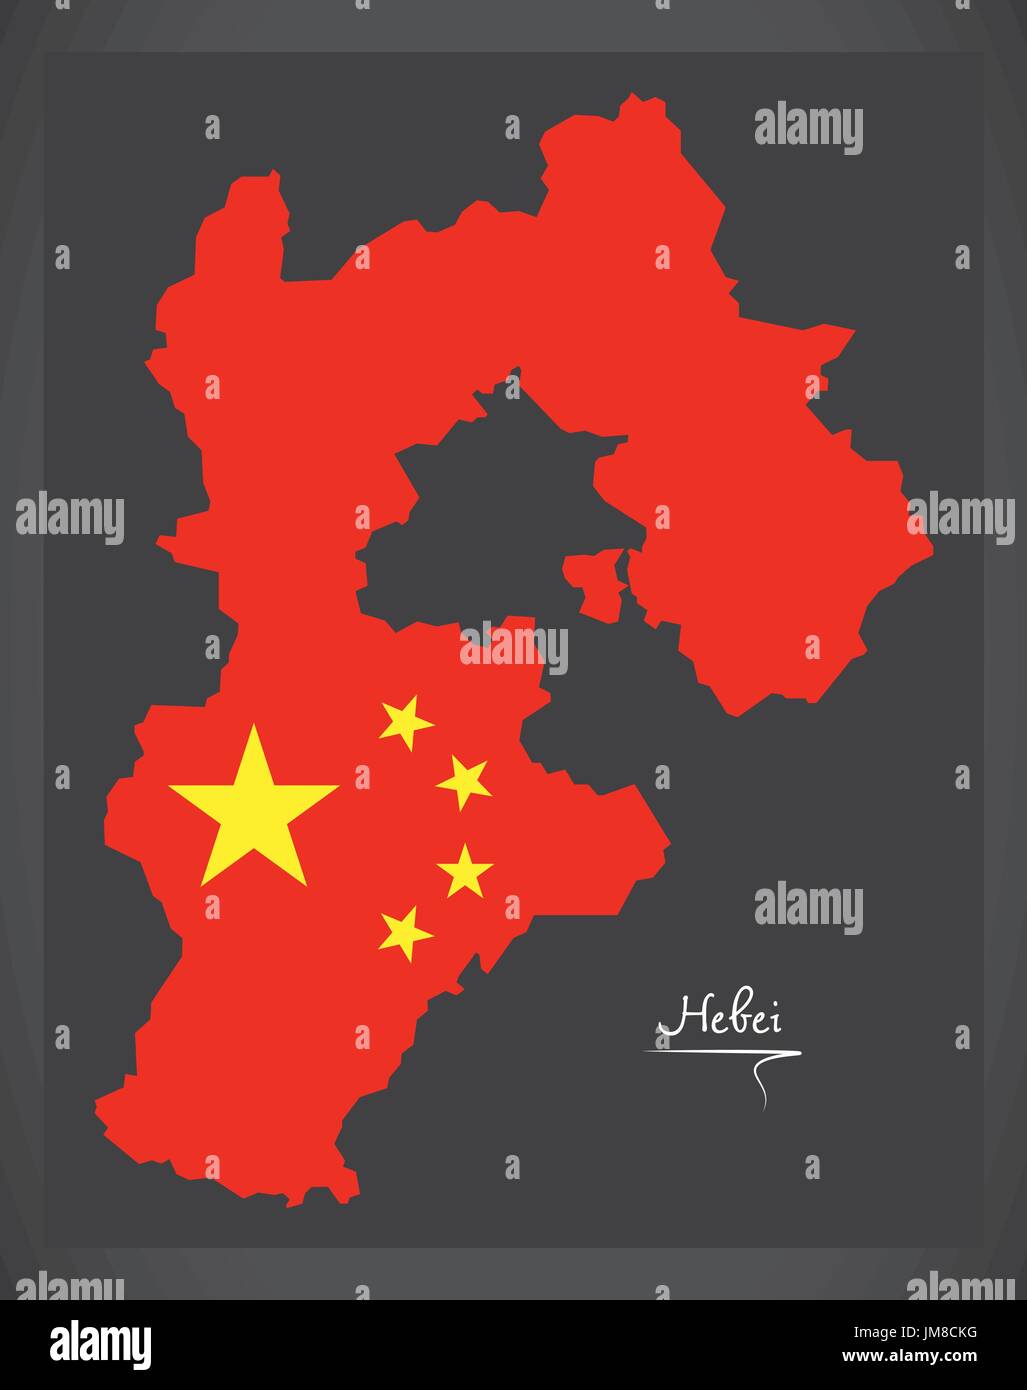 Hebei China map with Chinese national flag illustration Stock Vector